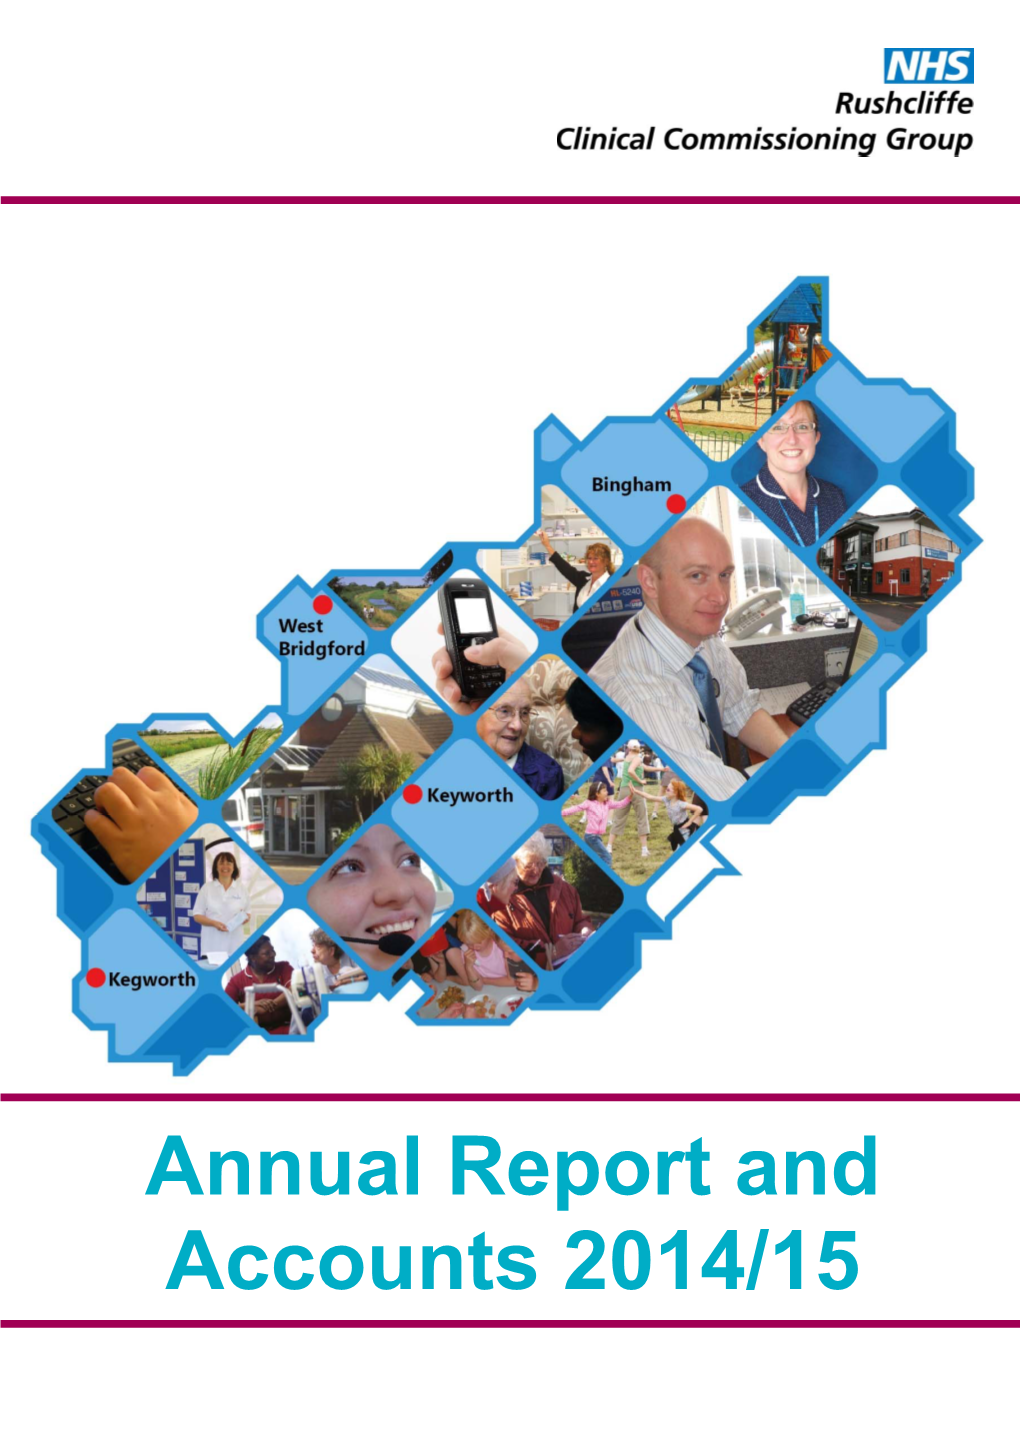 Annual Report and Accounts 2014/15 NHS Rushcliffe Clinical Commissioning Group Annual Report 2014/15